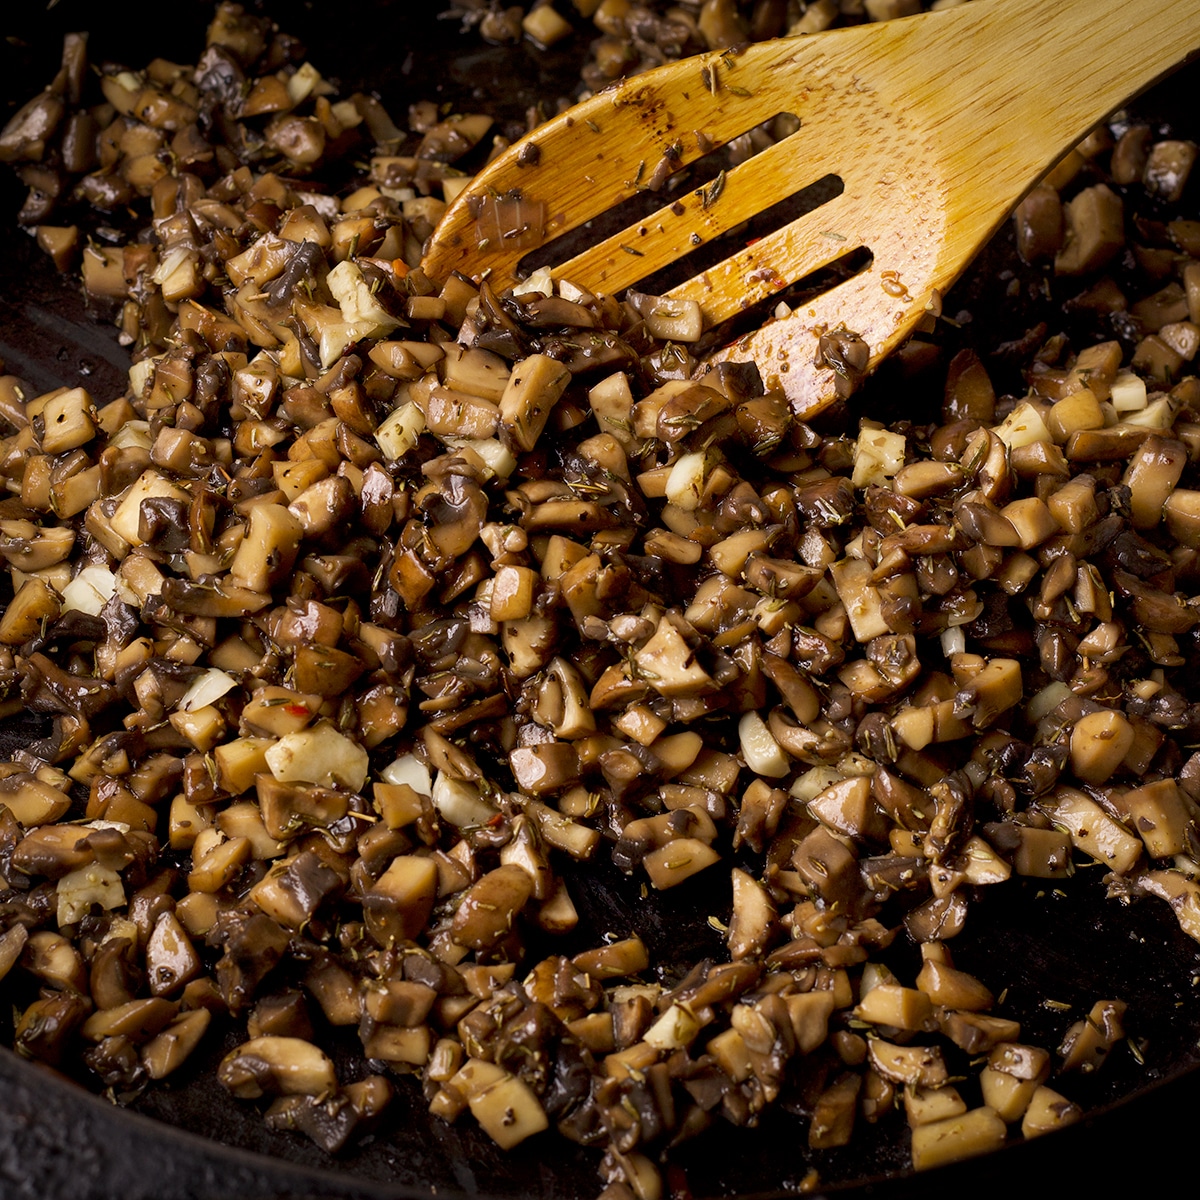 Someone using a wooden spoon to stir diced mushrooms as they cook in a cast iron skillet,